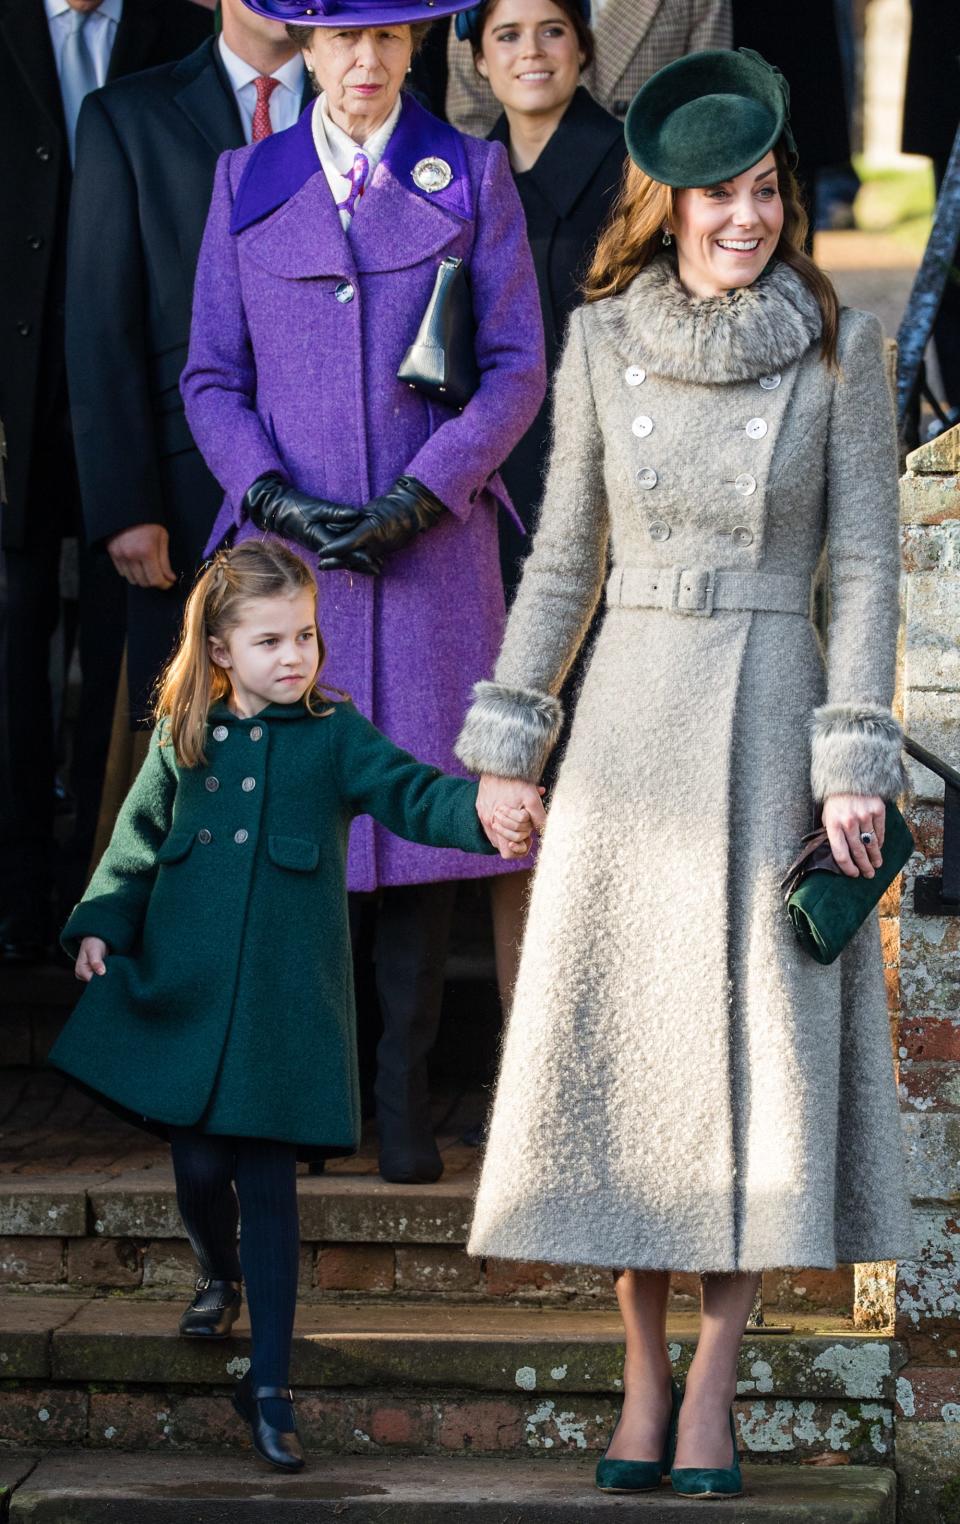 Princess Charlote and Kate Middleton stand together on a set of stone steps with other members of the royal family behind them.